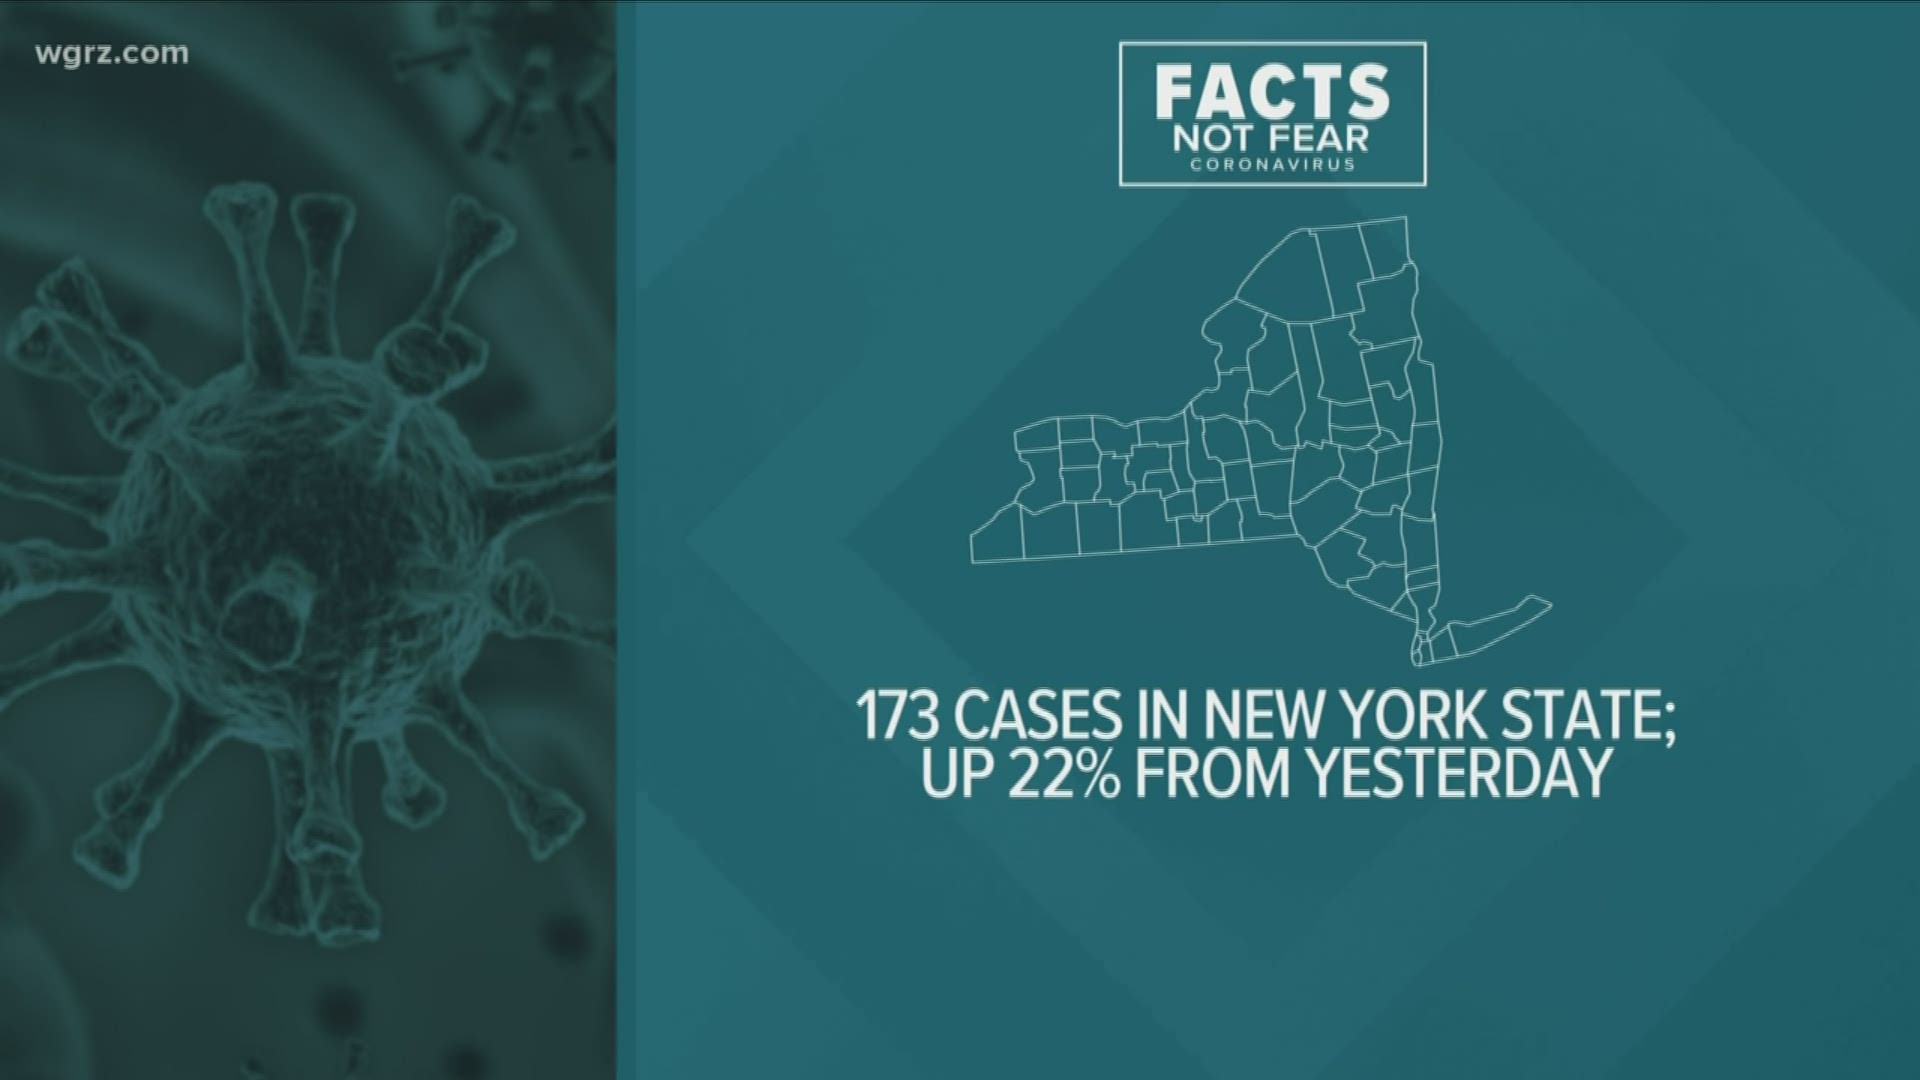 Tonight there are 173 confirmed cases here in New York State. That's up almost 22 percent from yesterday. But it's important to note still "no" confirmed cases here.